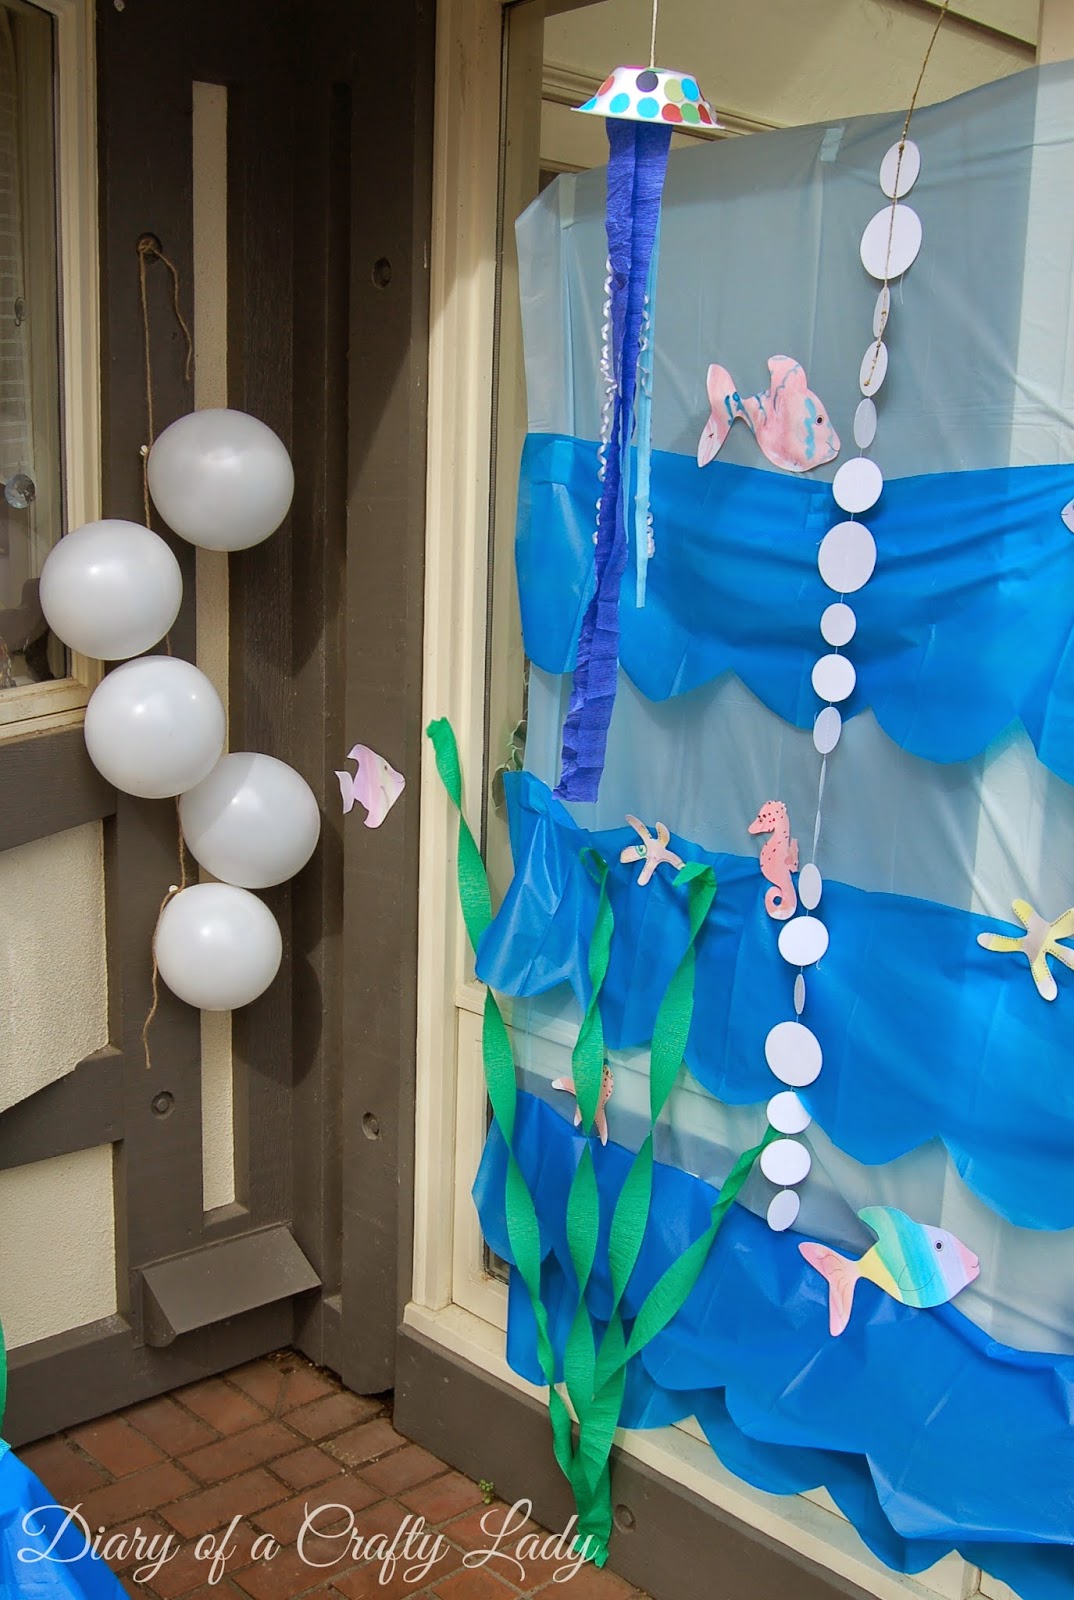 Diary of a Crafty Lady: Little Mermaid - Under the Sea Birthday Party